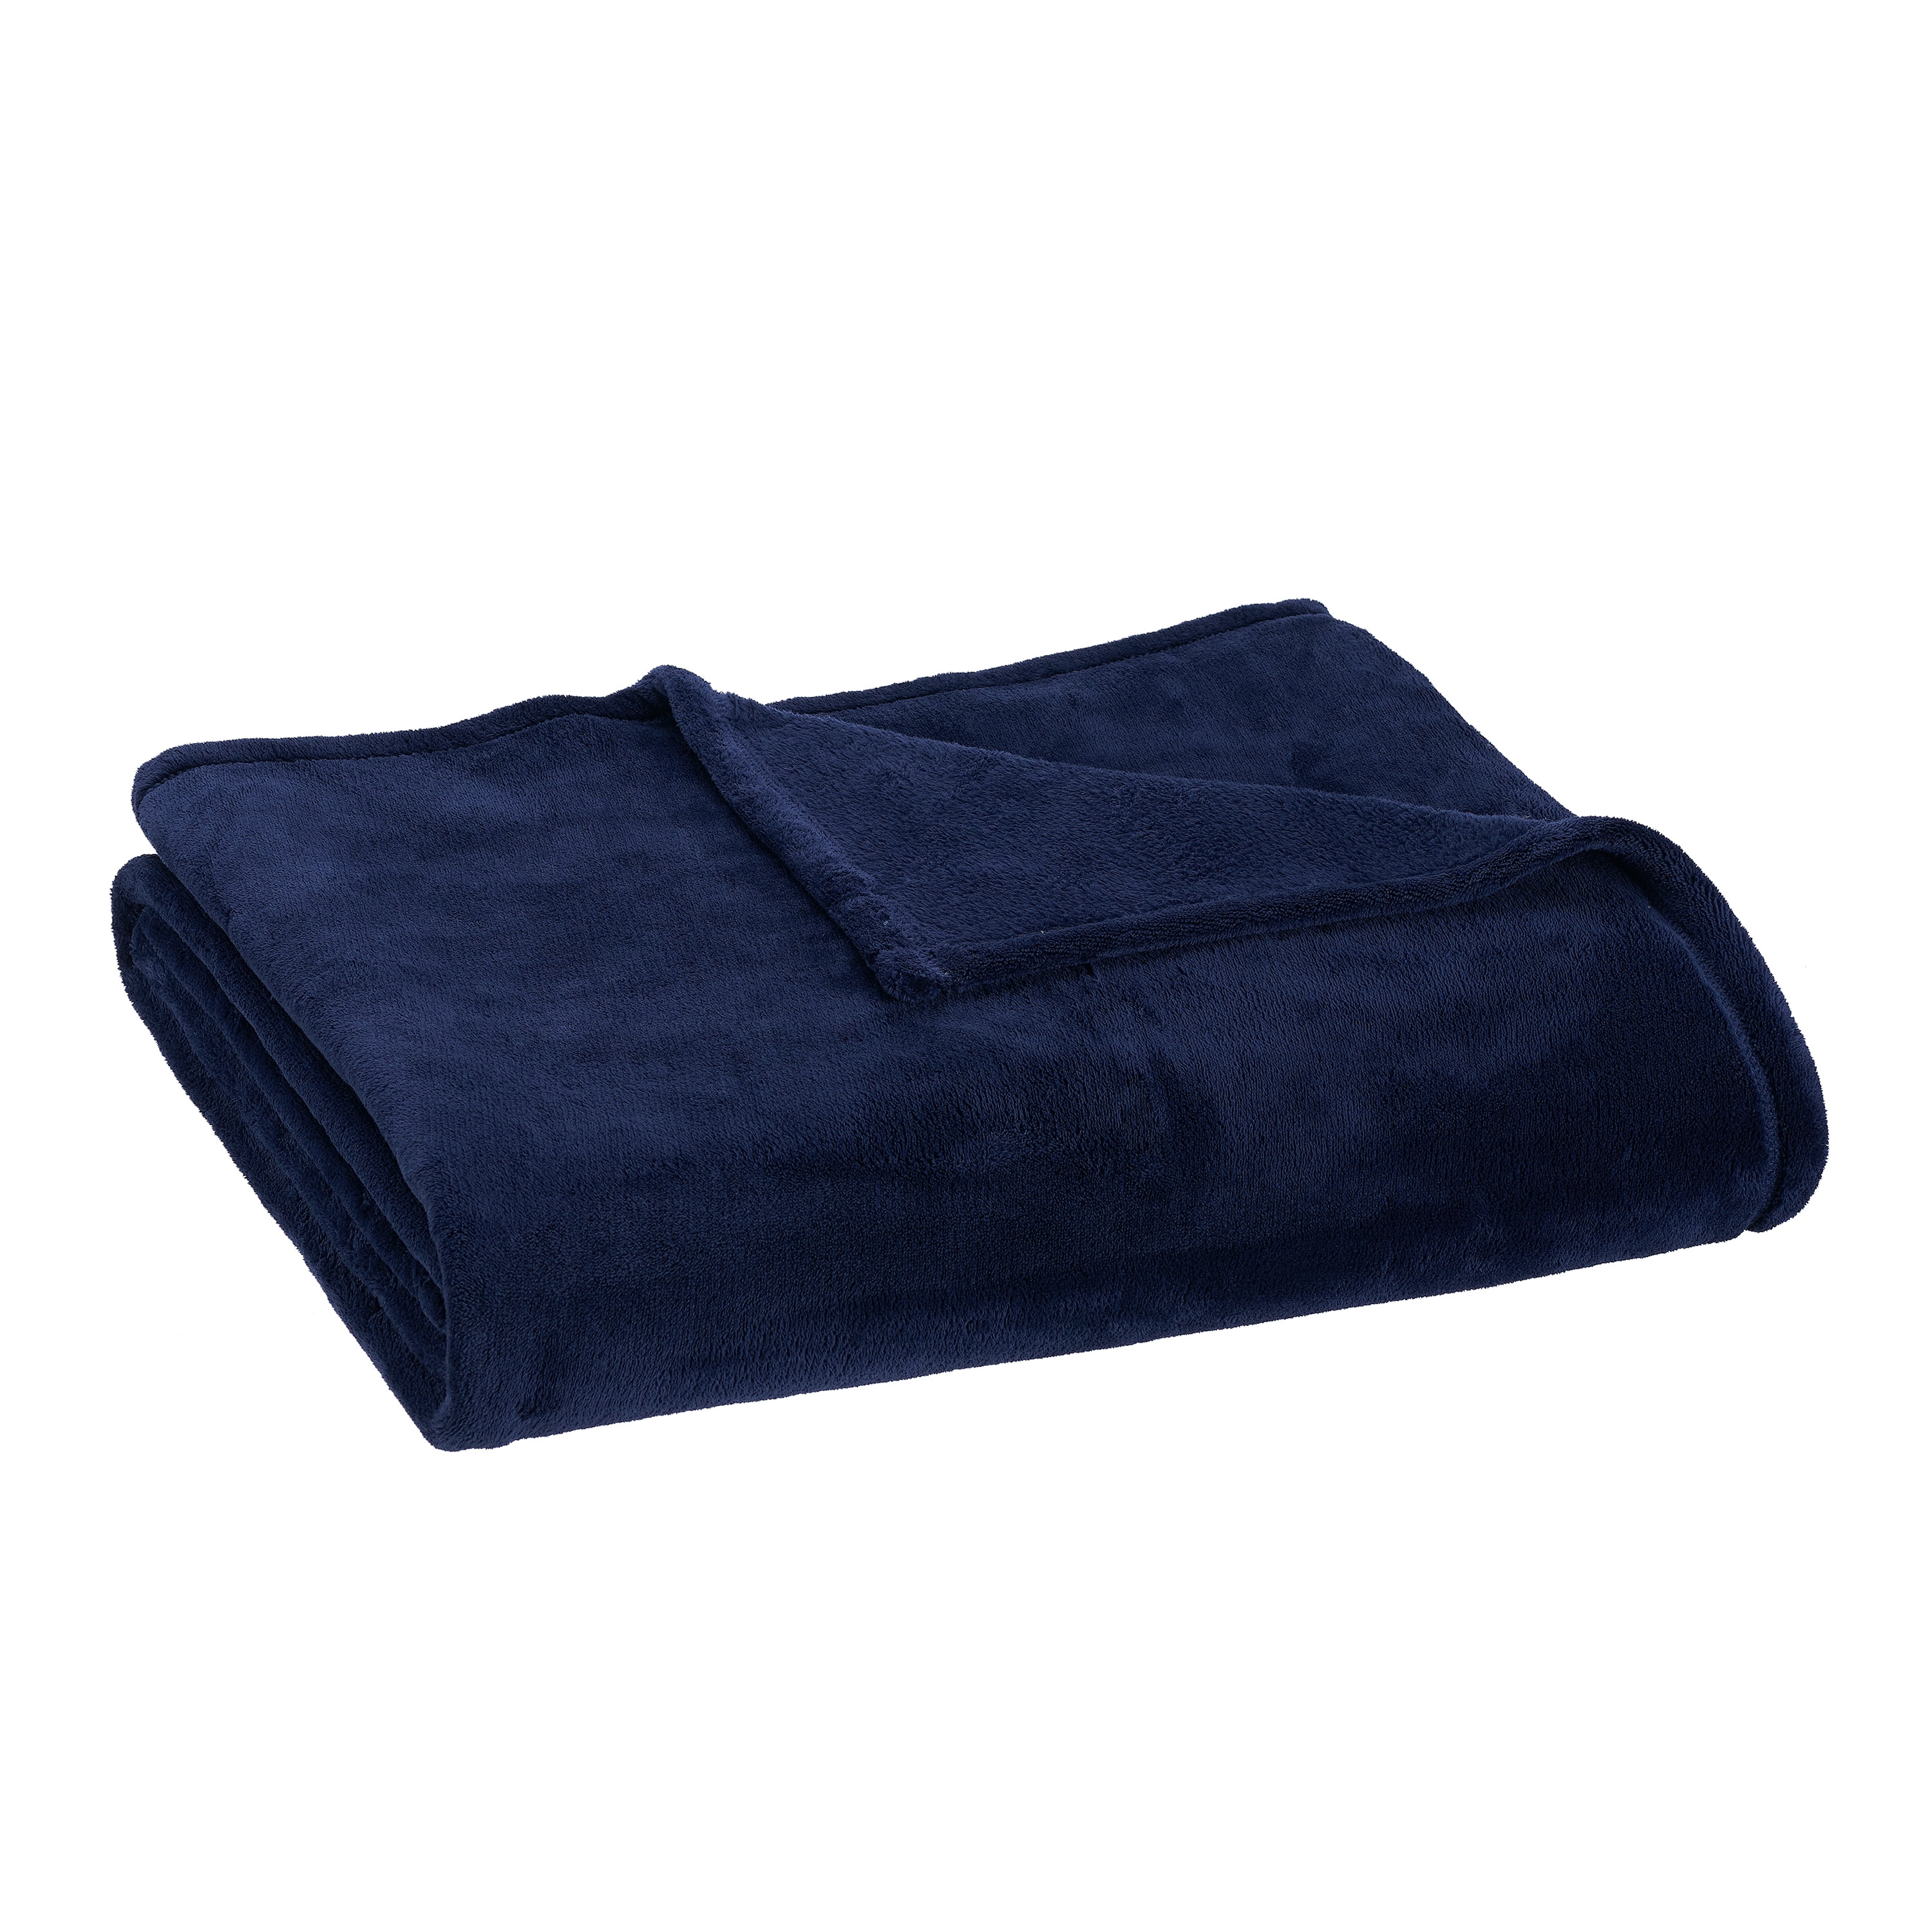 Soft Plush Twin Bed Blanket In Indigo, Twin Bed Blanket